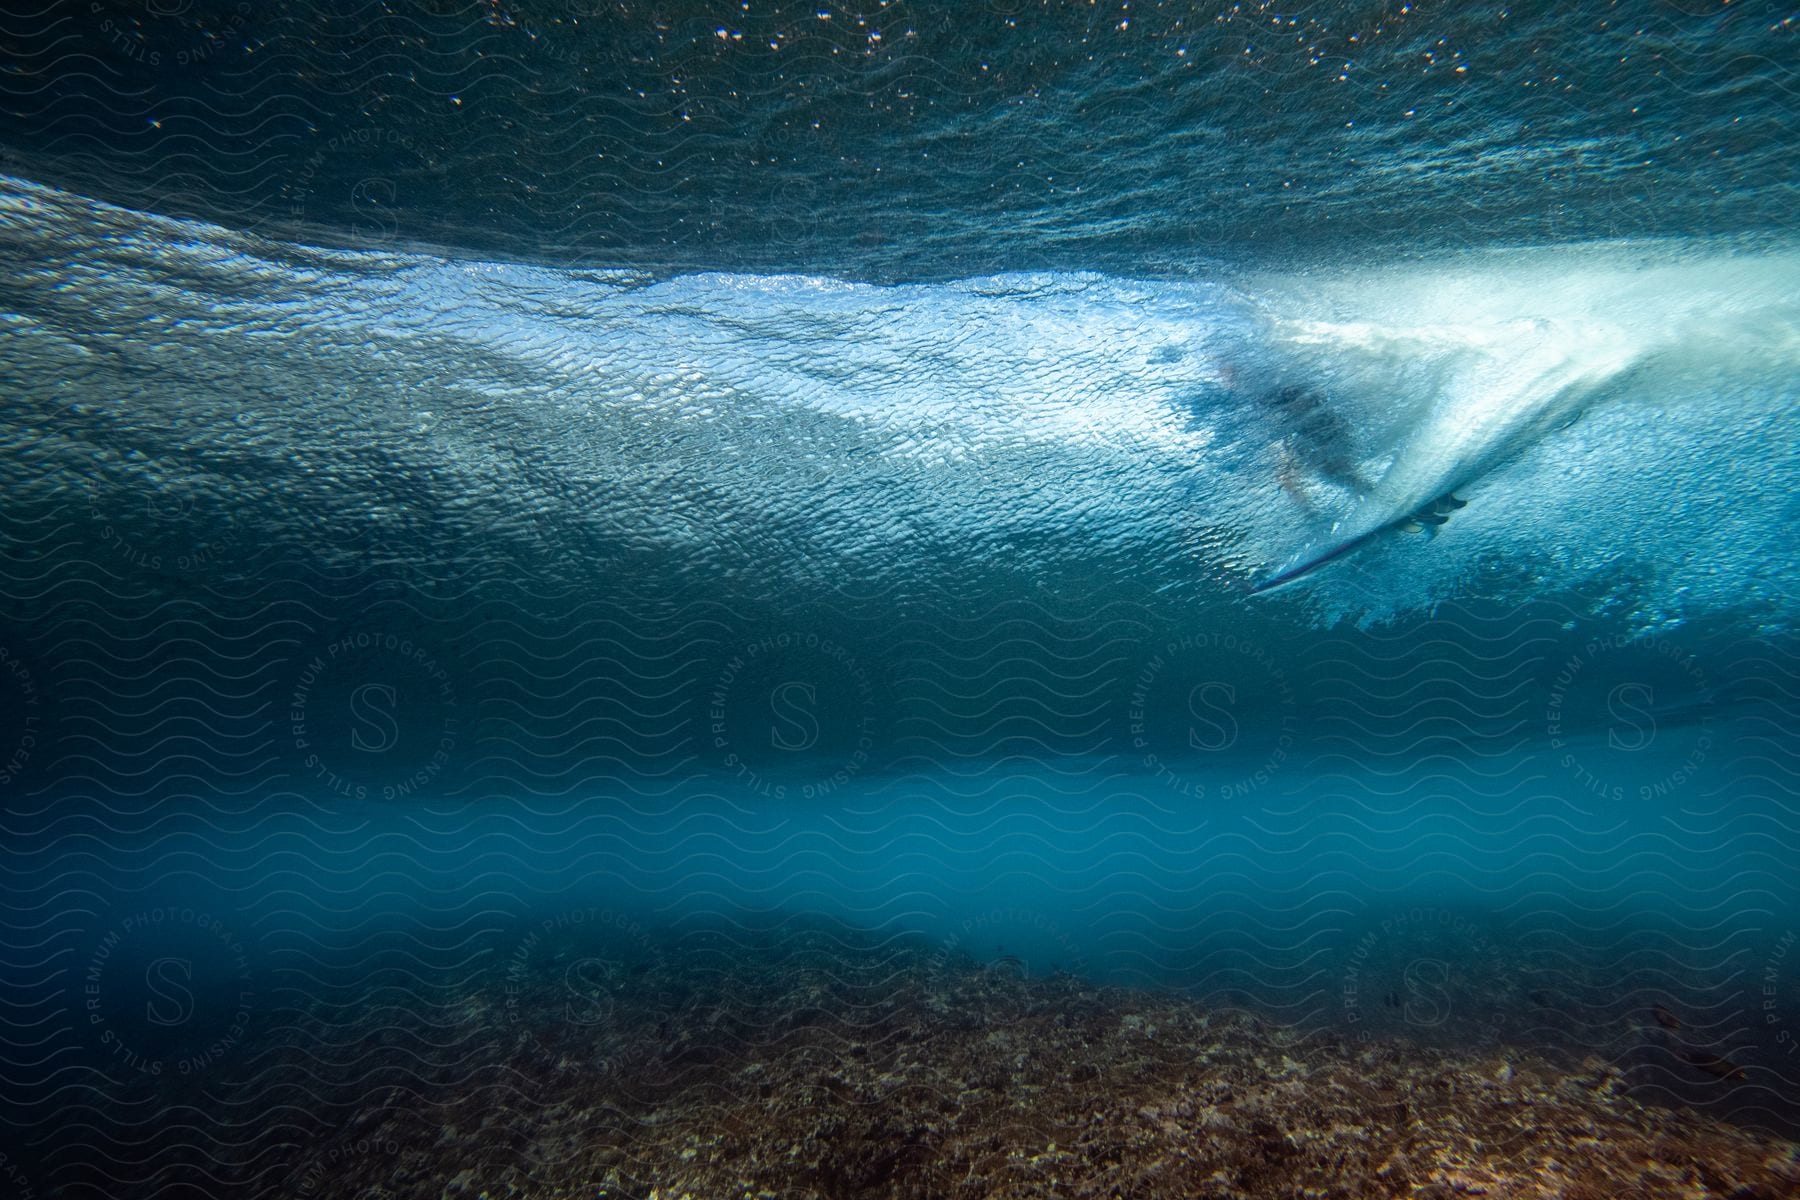 Underwater view of corals and a person surfing a wave.